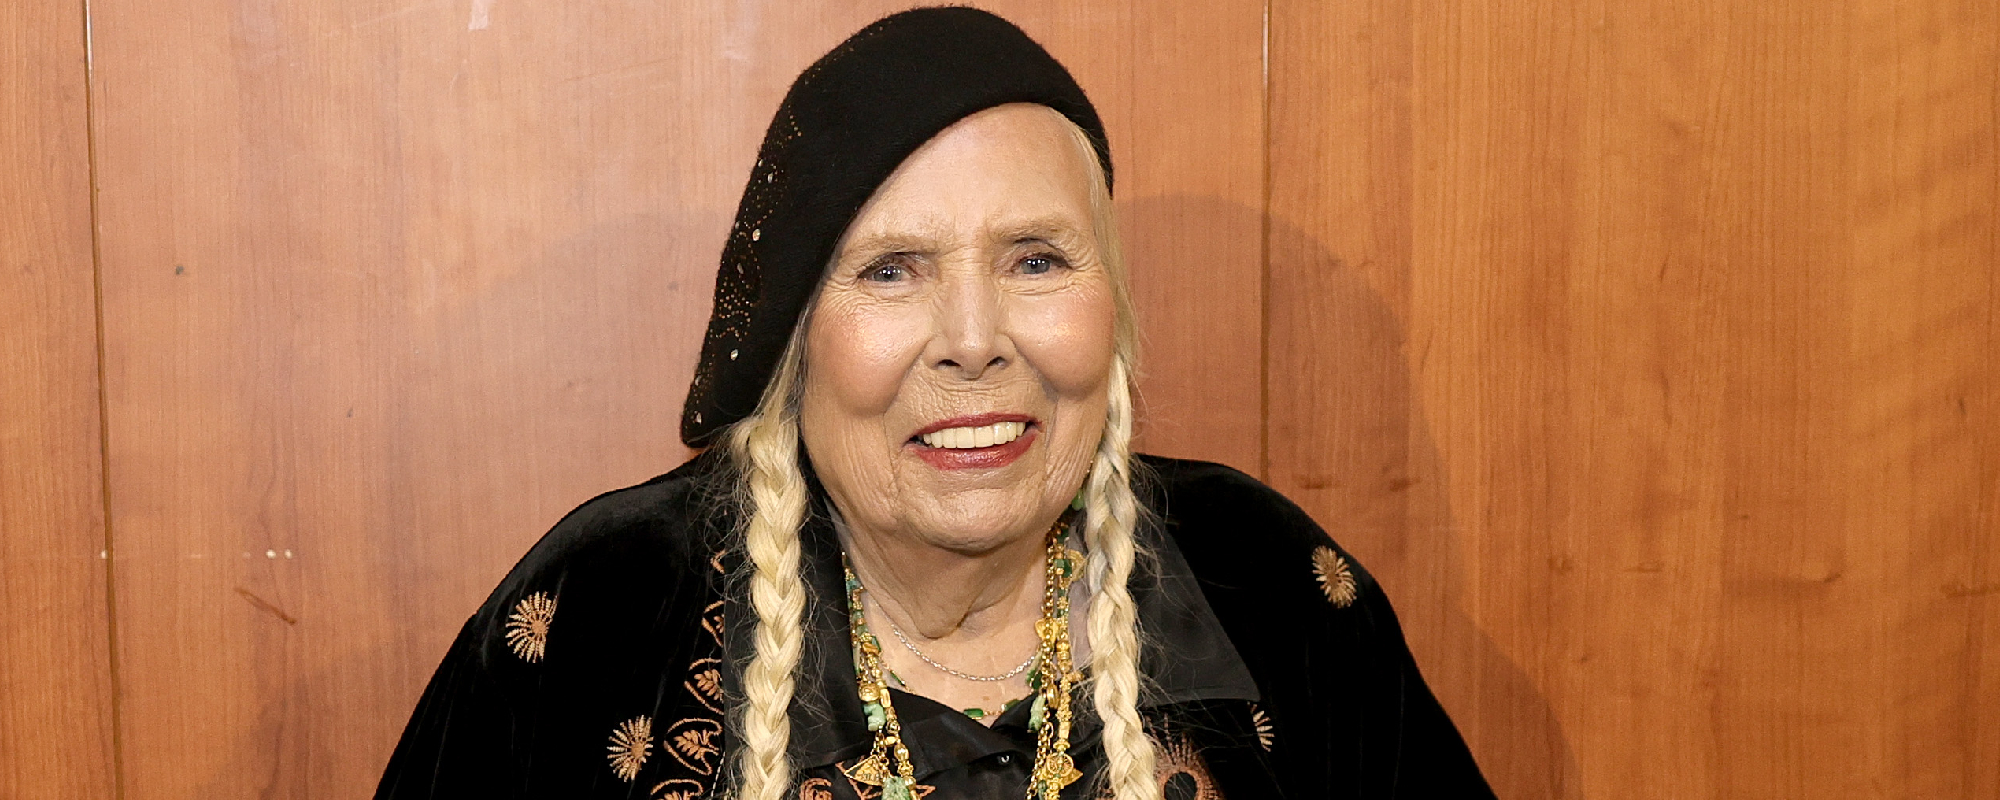 Joni Mitchell Returns to Spotify, Ending Joe Rogan Protest Days After Neil Young